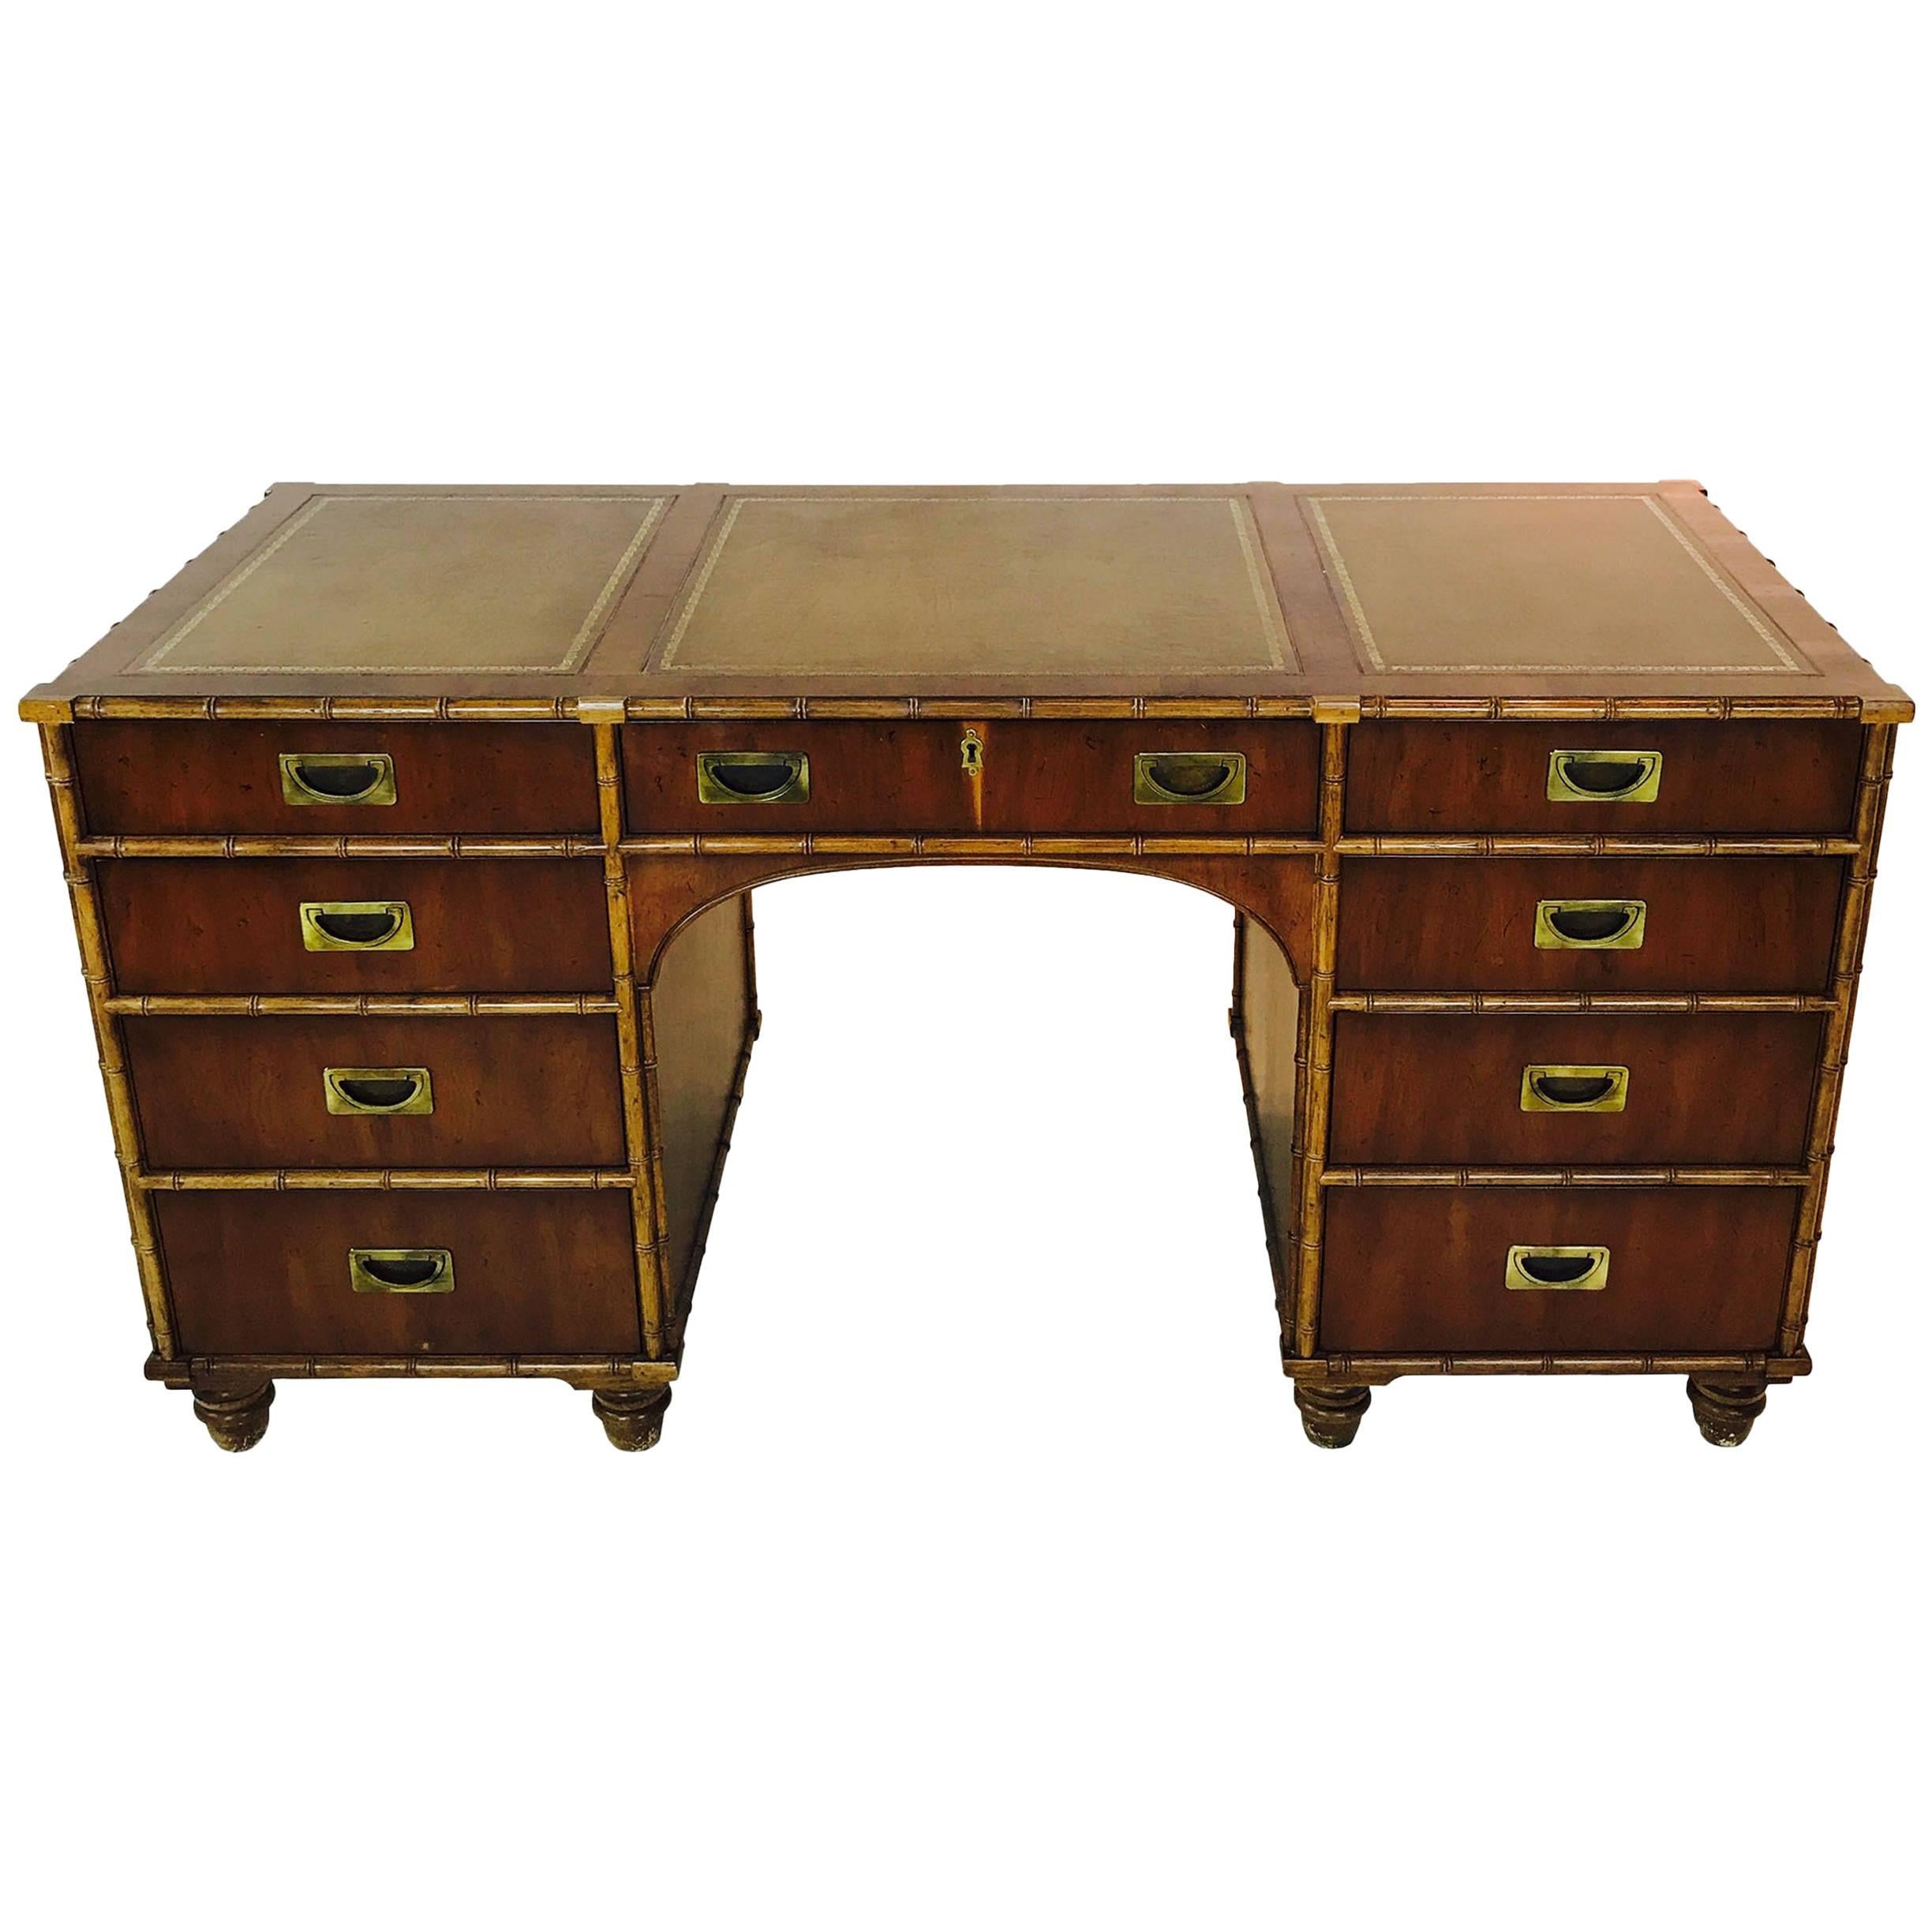 Henredon Faux Bamboo Desk with Inlaid Leather Top